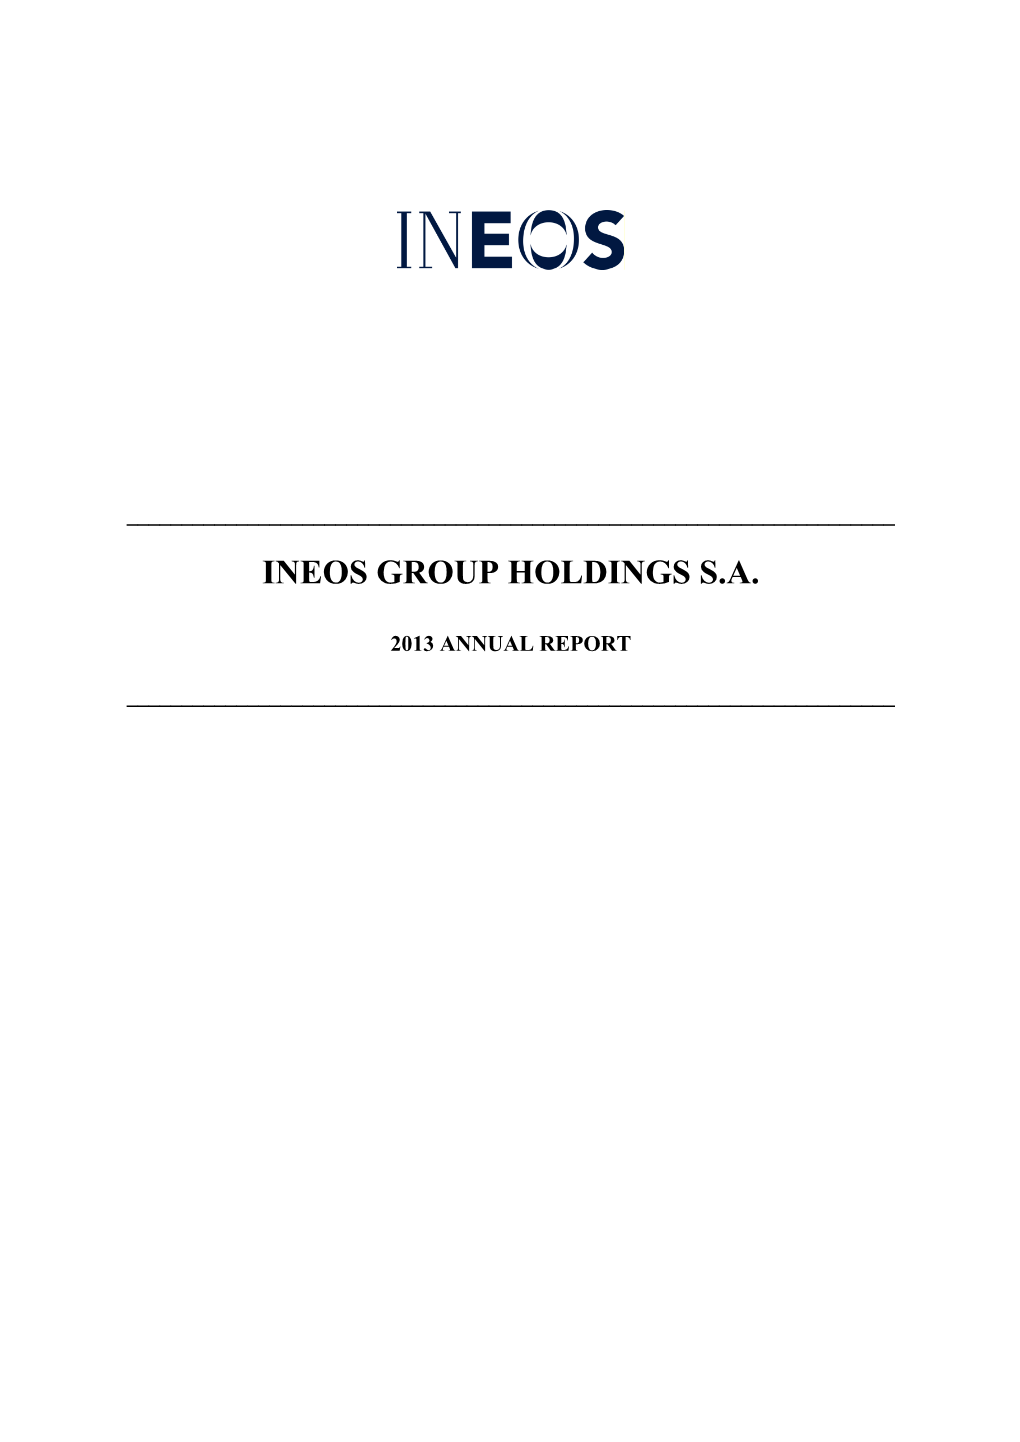 Ineos Group Holdings S.A